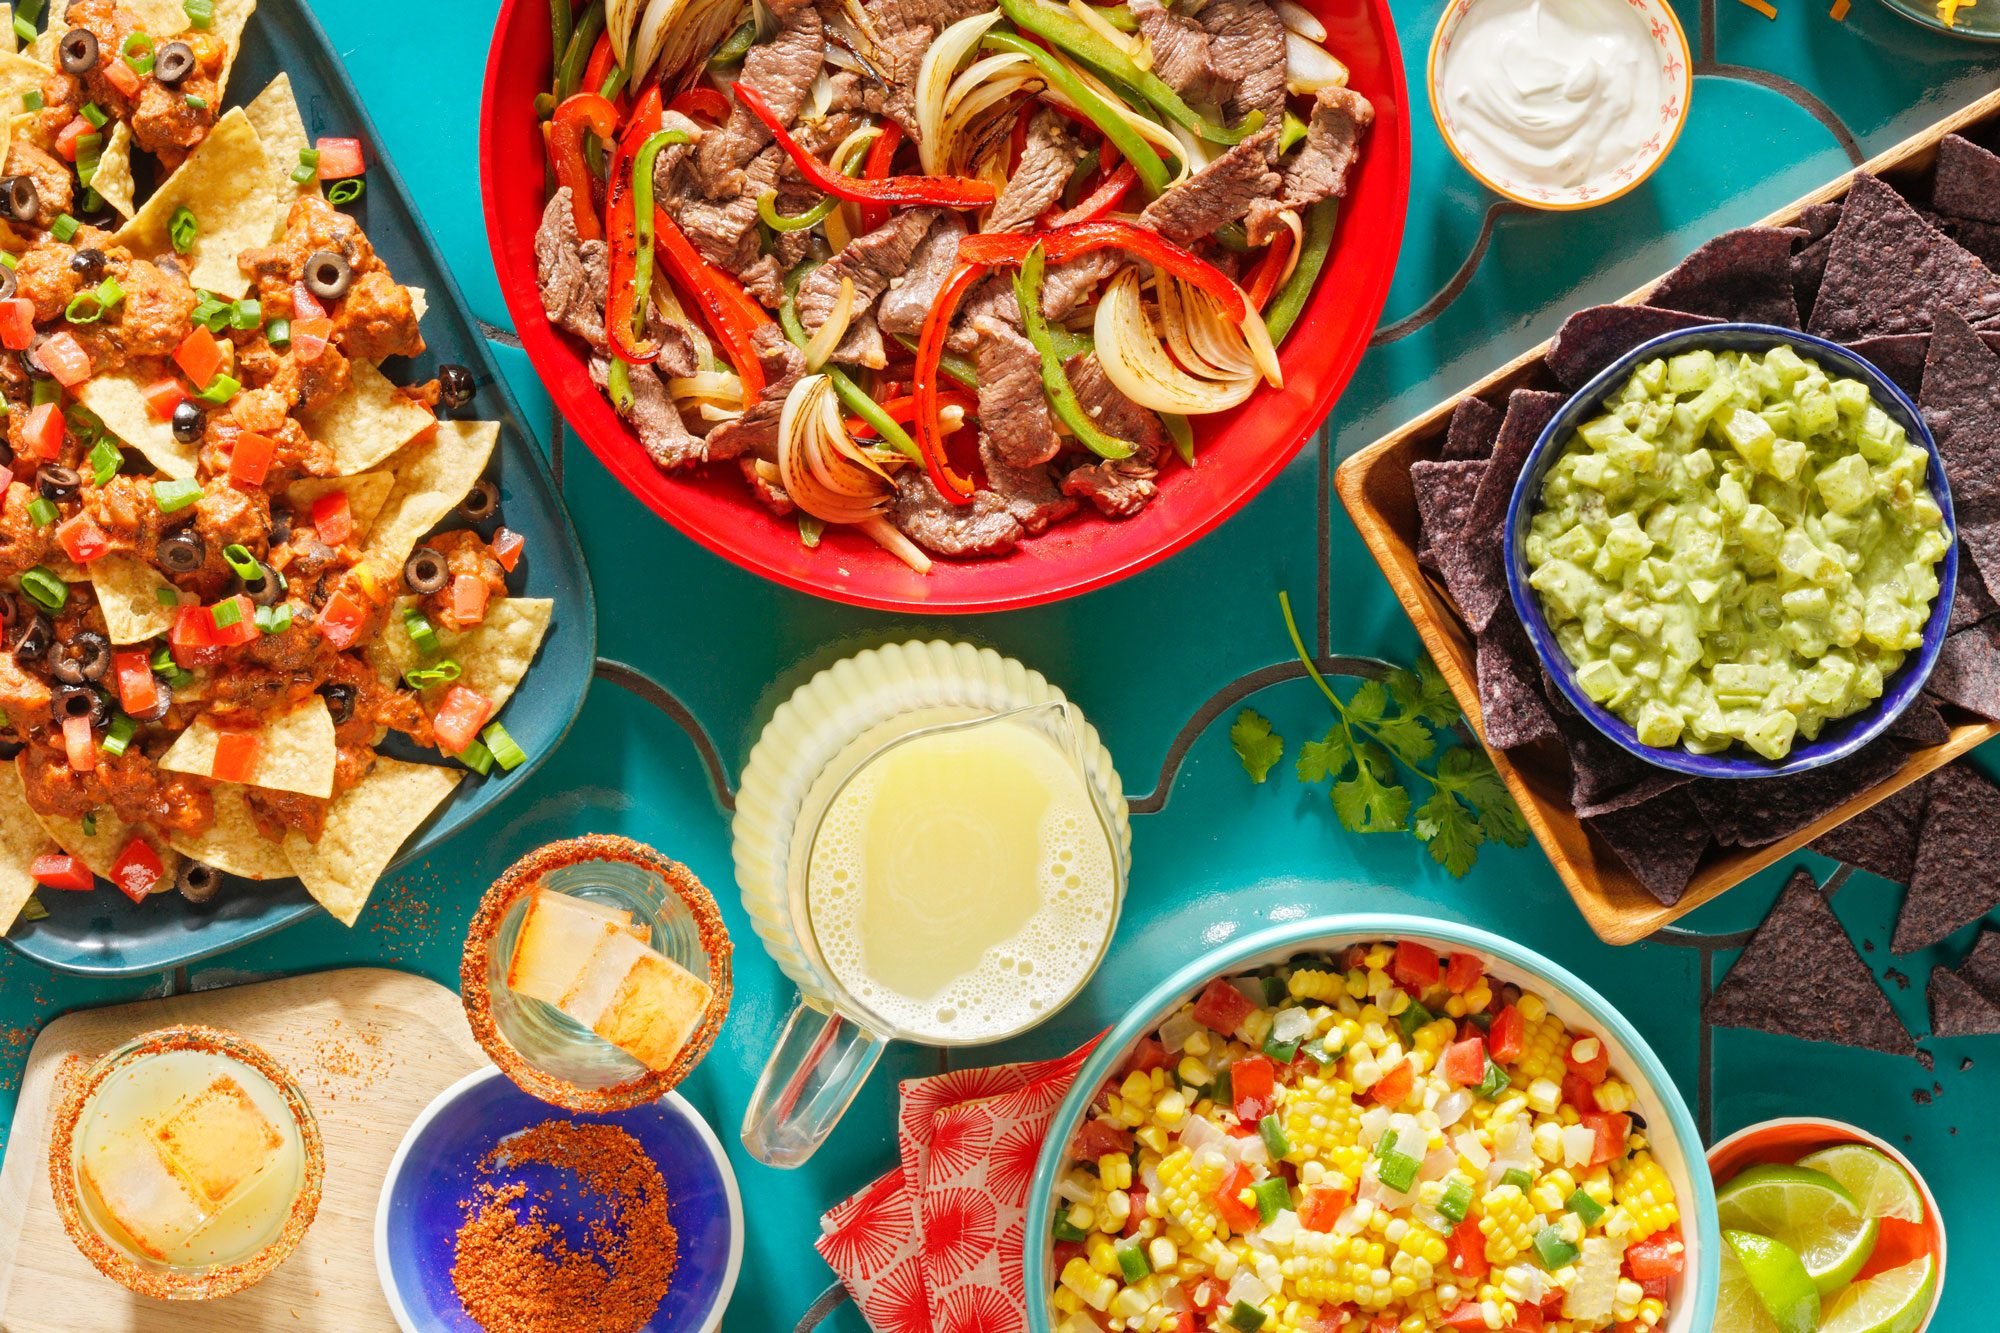 Tacos or Chimichangas anyone? Get ready for our South Western Menu